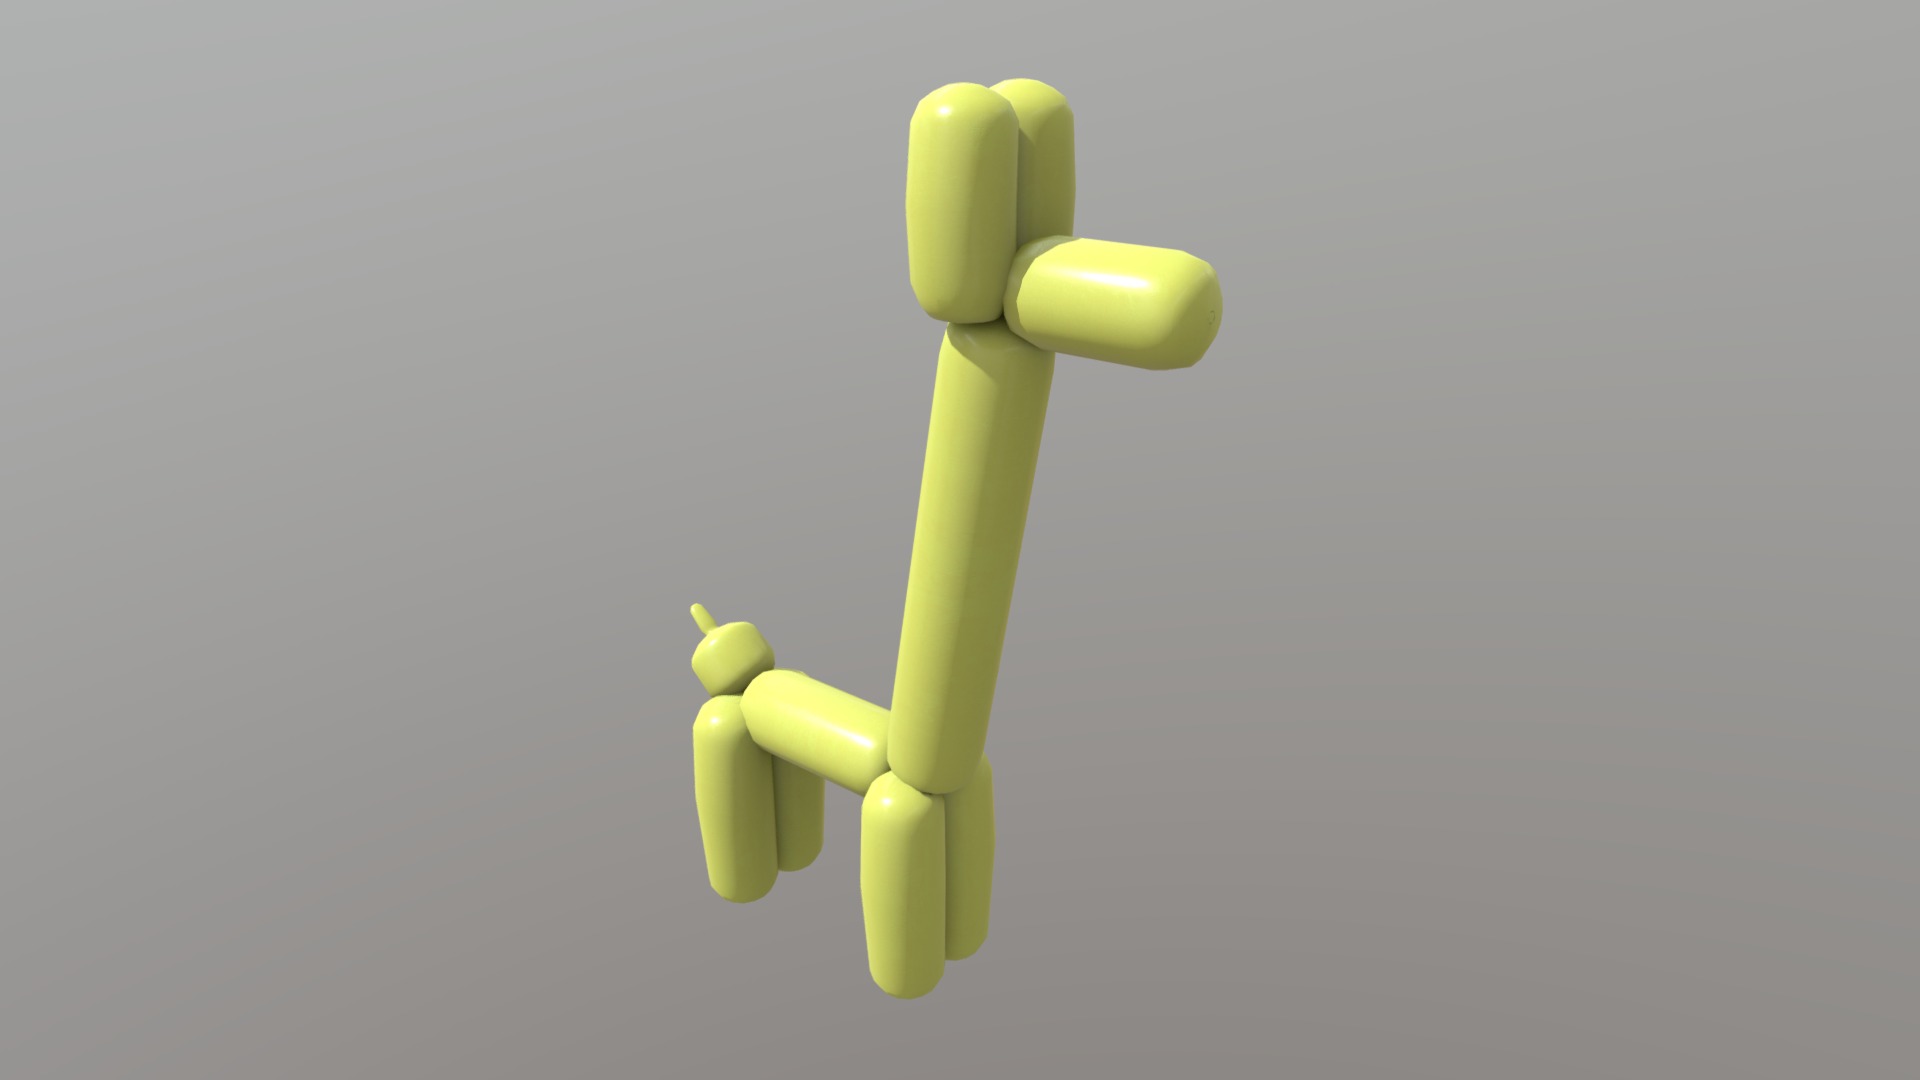 3D model Balloon Giraffe - This is a 3D model of the Balloon Giraffe. The 3D model is about a yellow toy on a white background.